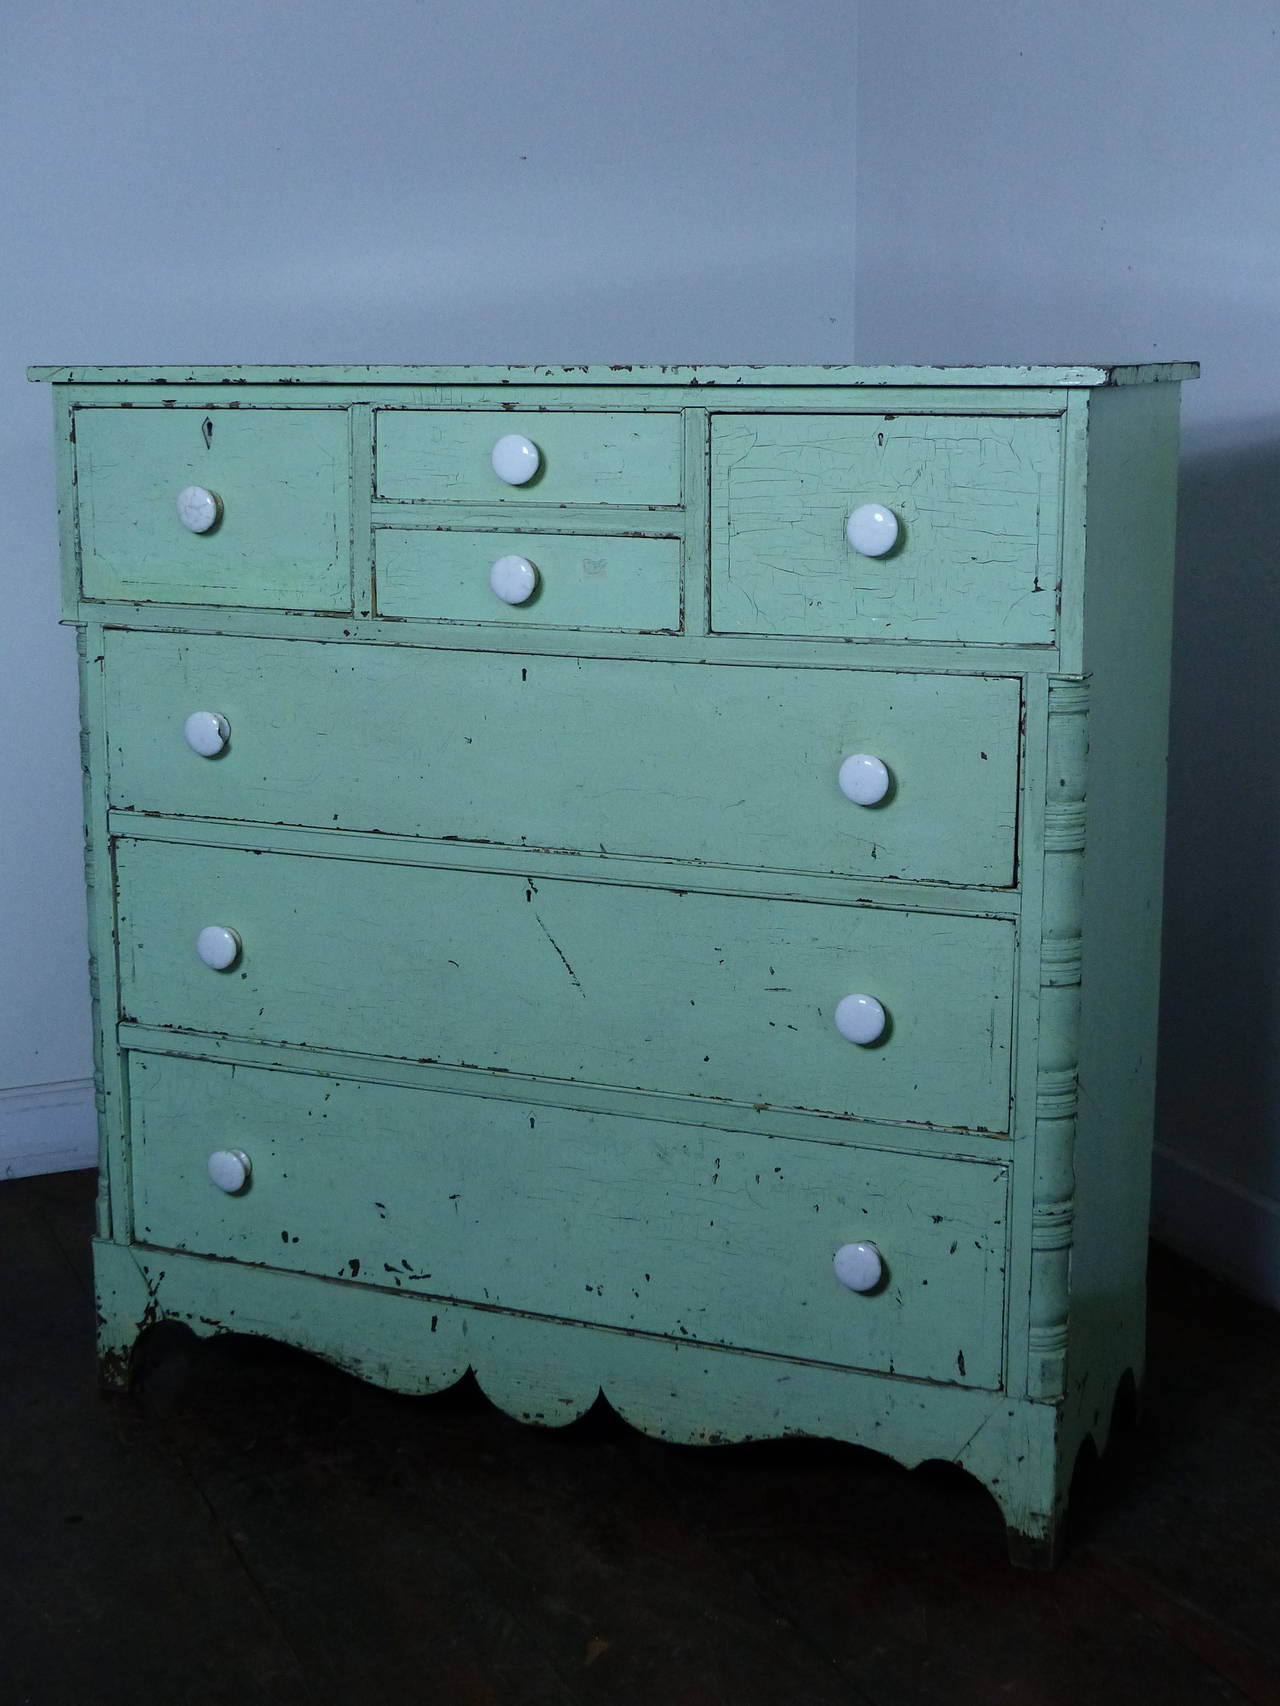 Recently acquired chest of drawers from Nova Scotia with age cracked polychromatic paint over an old original cream colored surface. The primary wood is butternut with inlay details and secondary wood being white pine. The chest is very solid with a